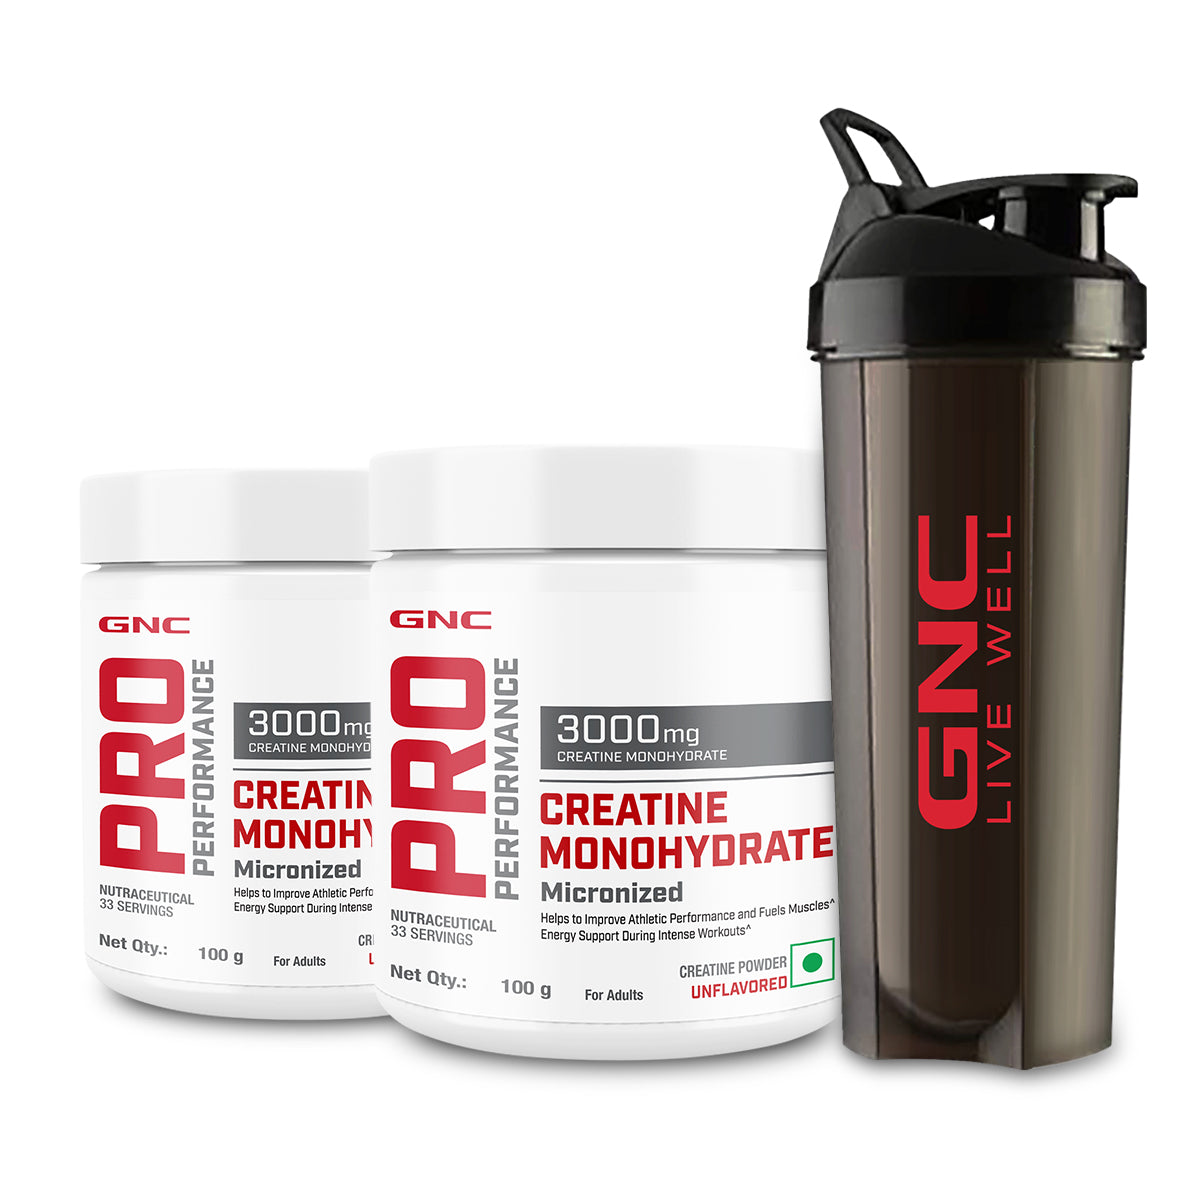 GNC Pro Performance Creatine Monohydrate - Powerful Muscle Pump for Intense Workout